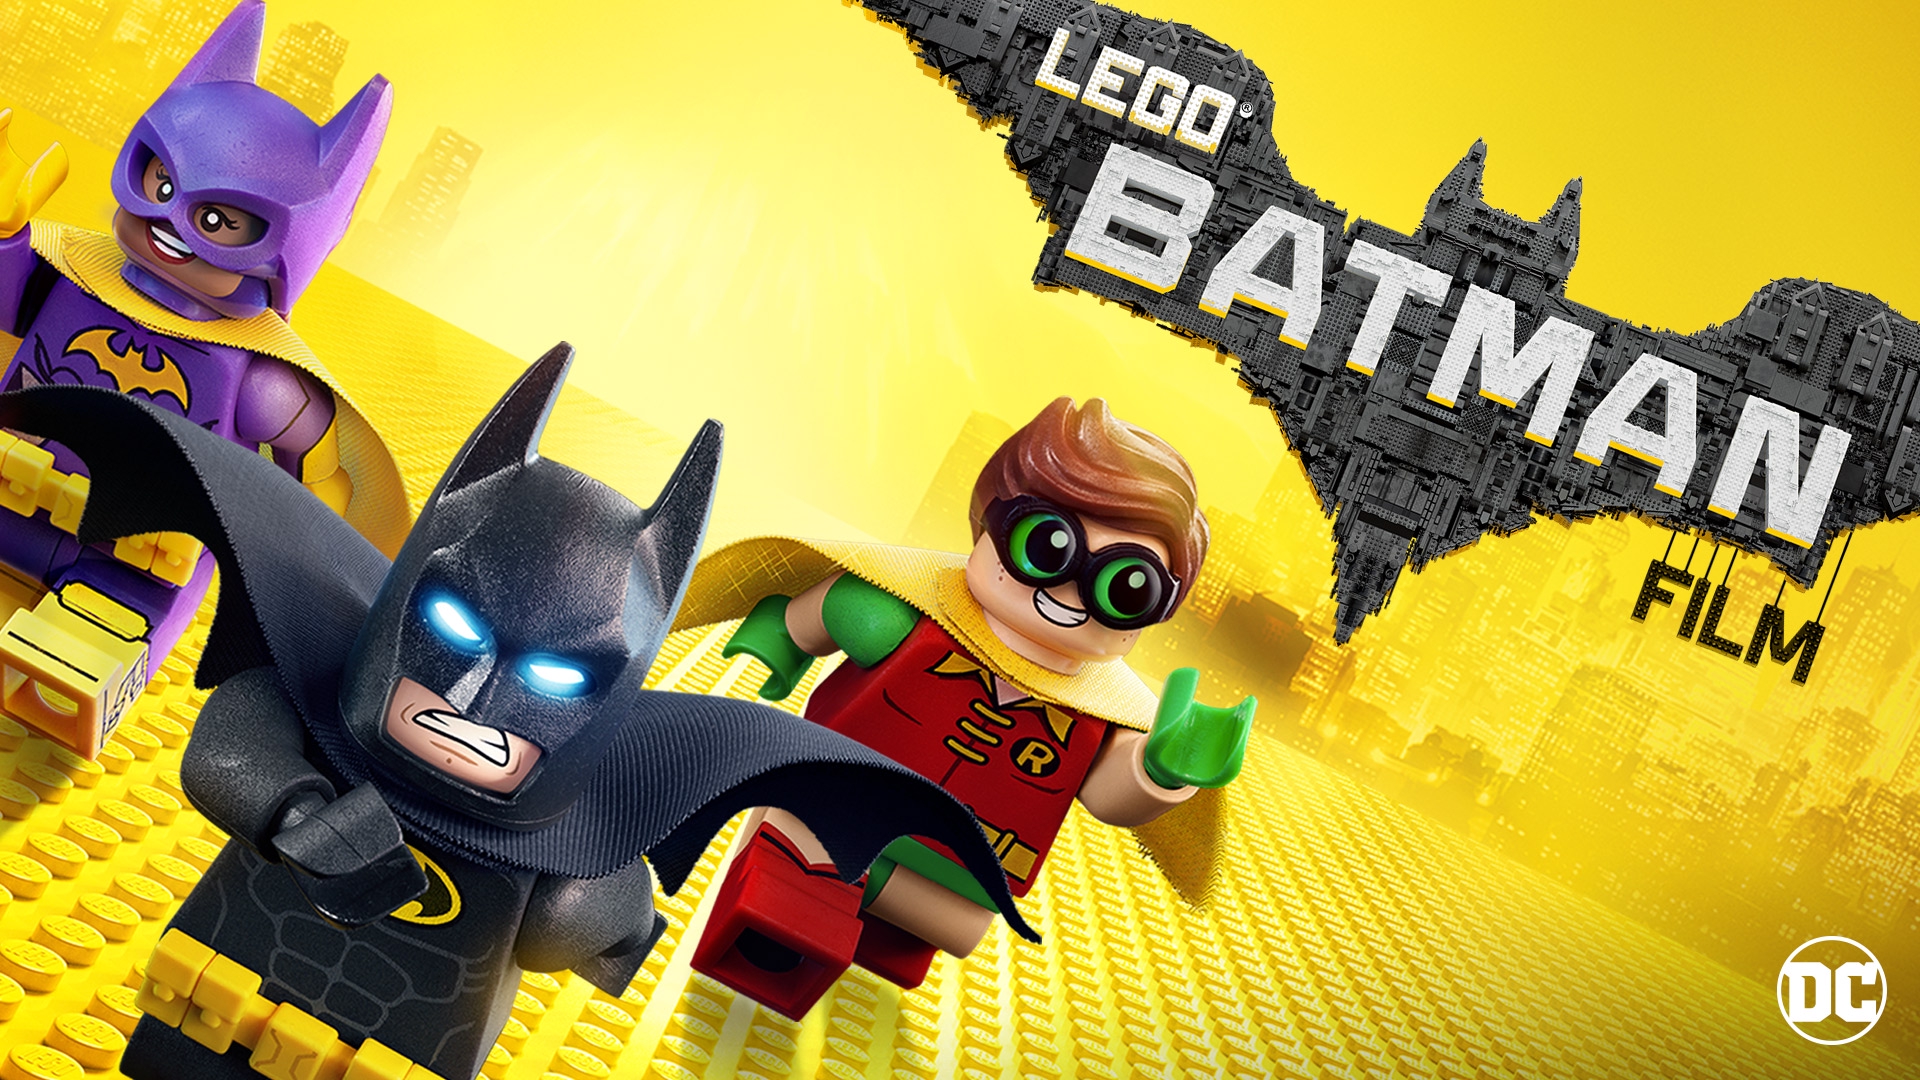 Stream The Lego Batman Movie Online | Download and Watch HD Movies | Stan